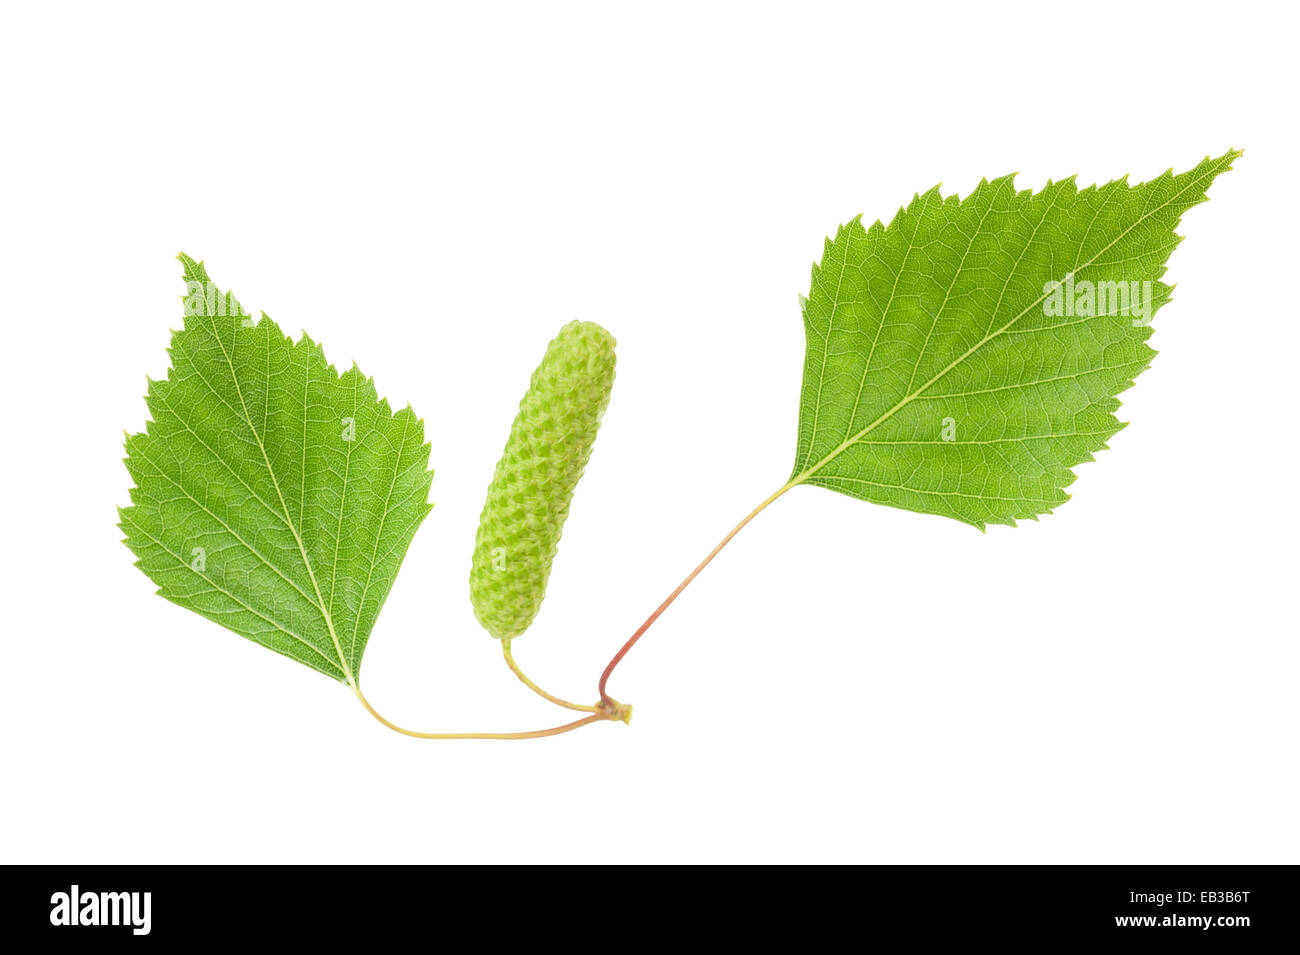 Birch sprig with catkin isolated on white. Stock Photo